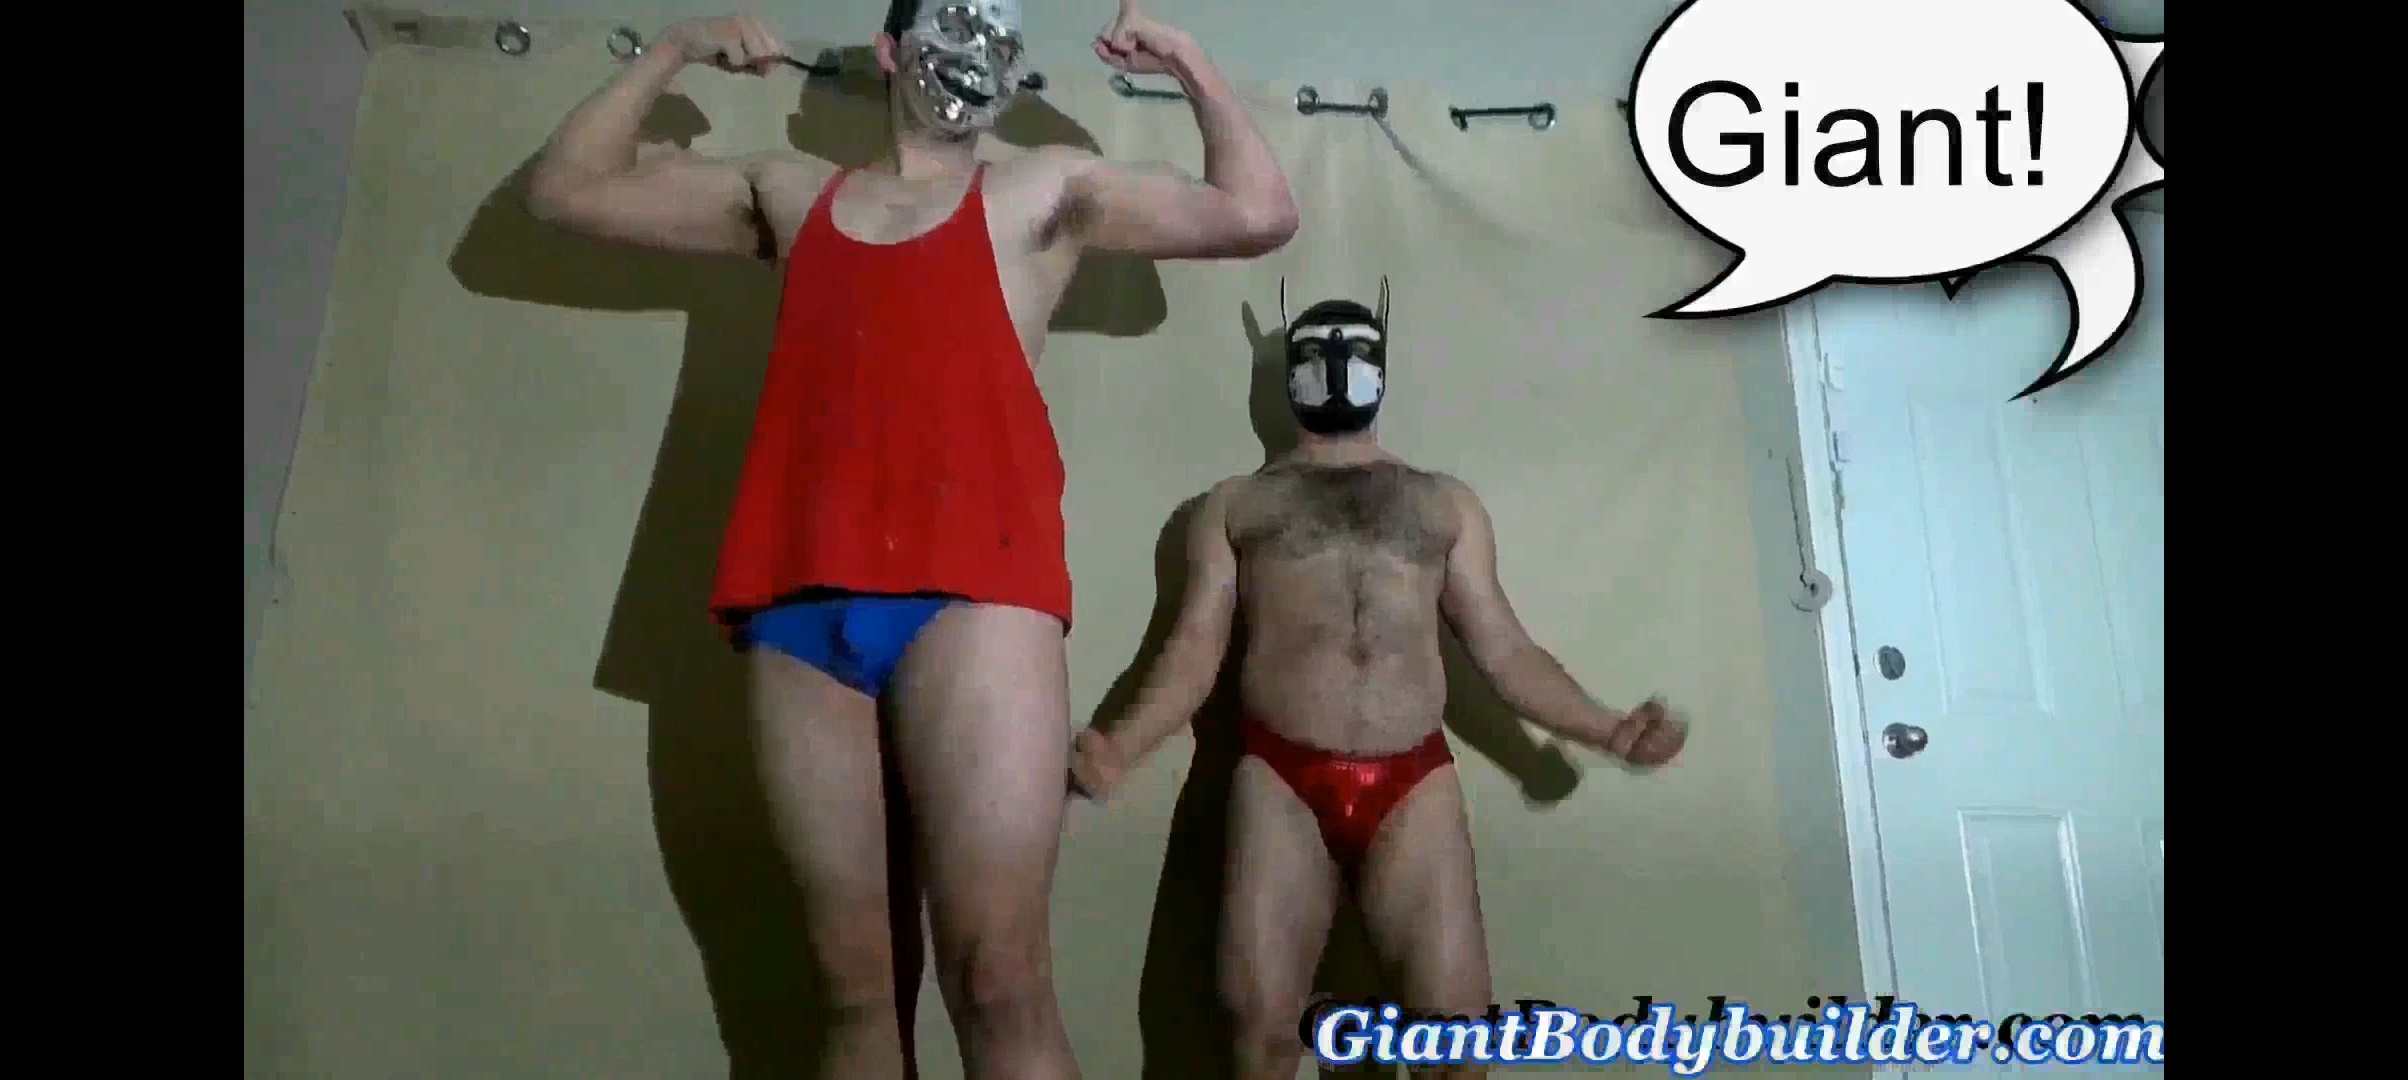 Giant boy vs average man, Overpowered by young tallest!